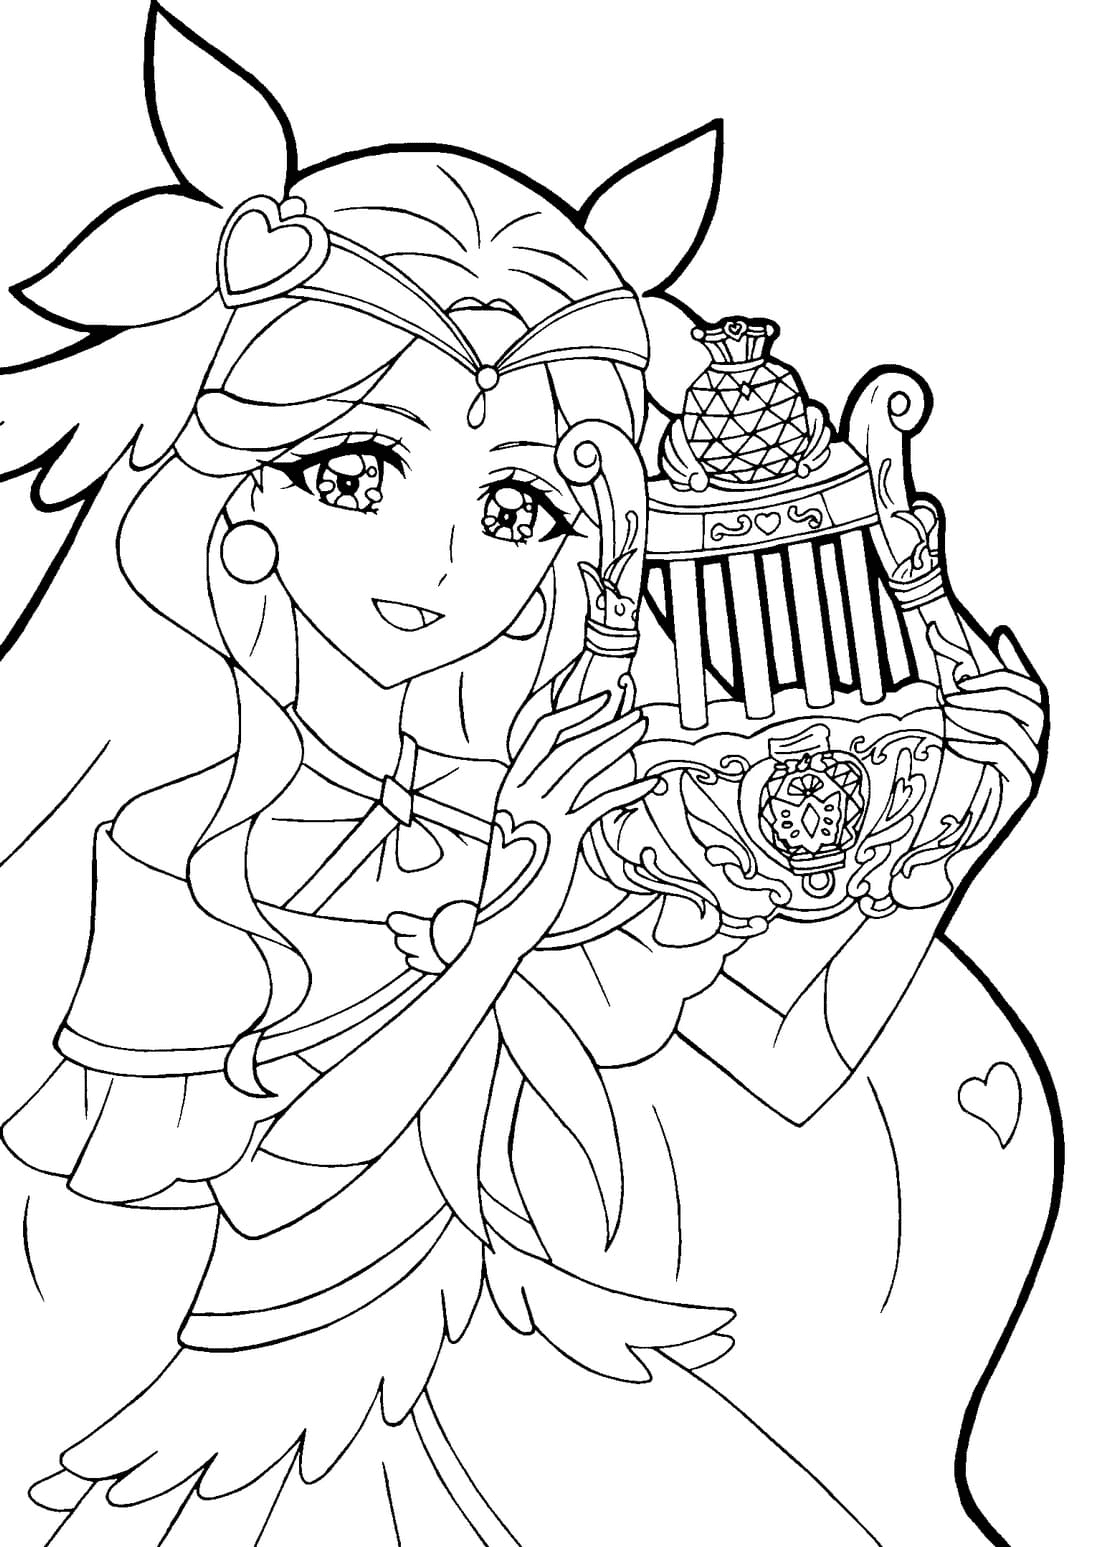 Adorable Girl Coloring Page